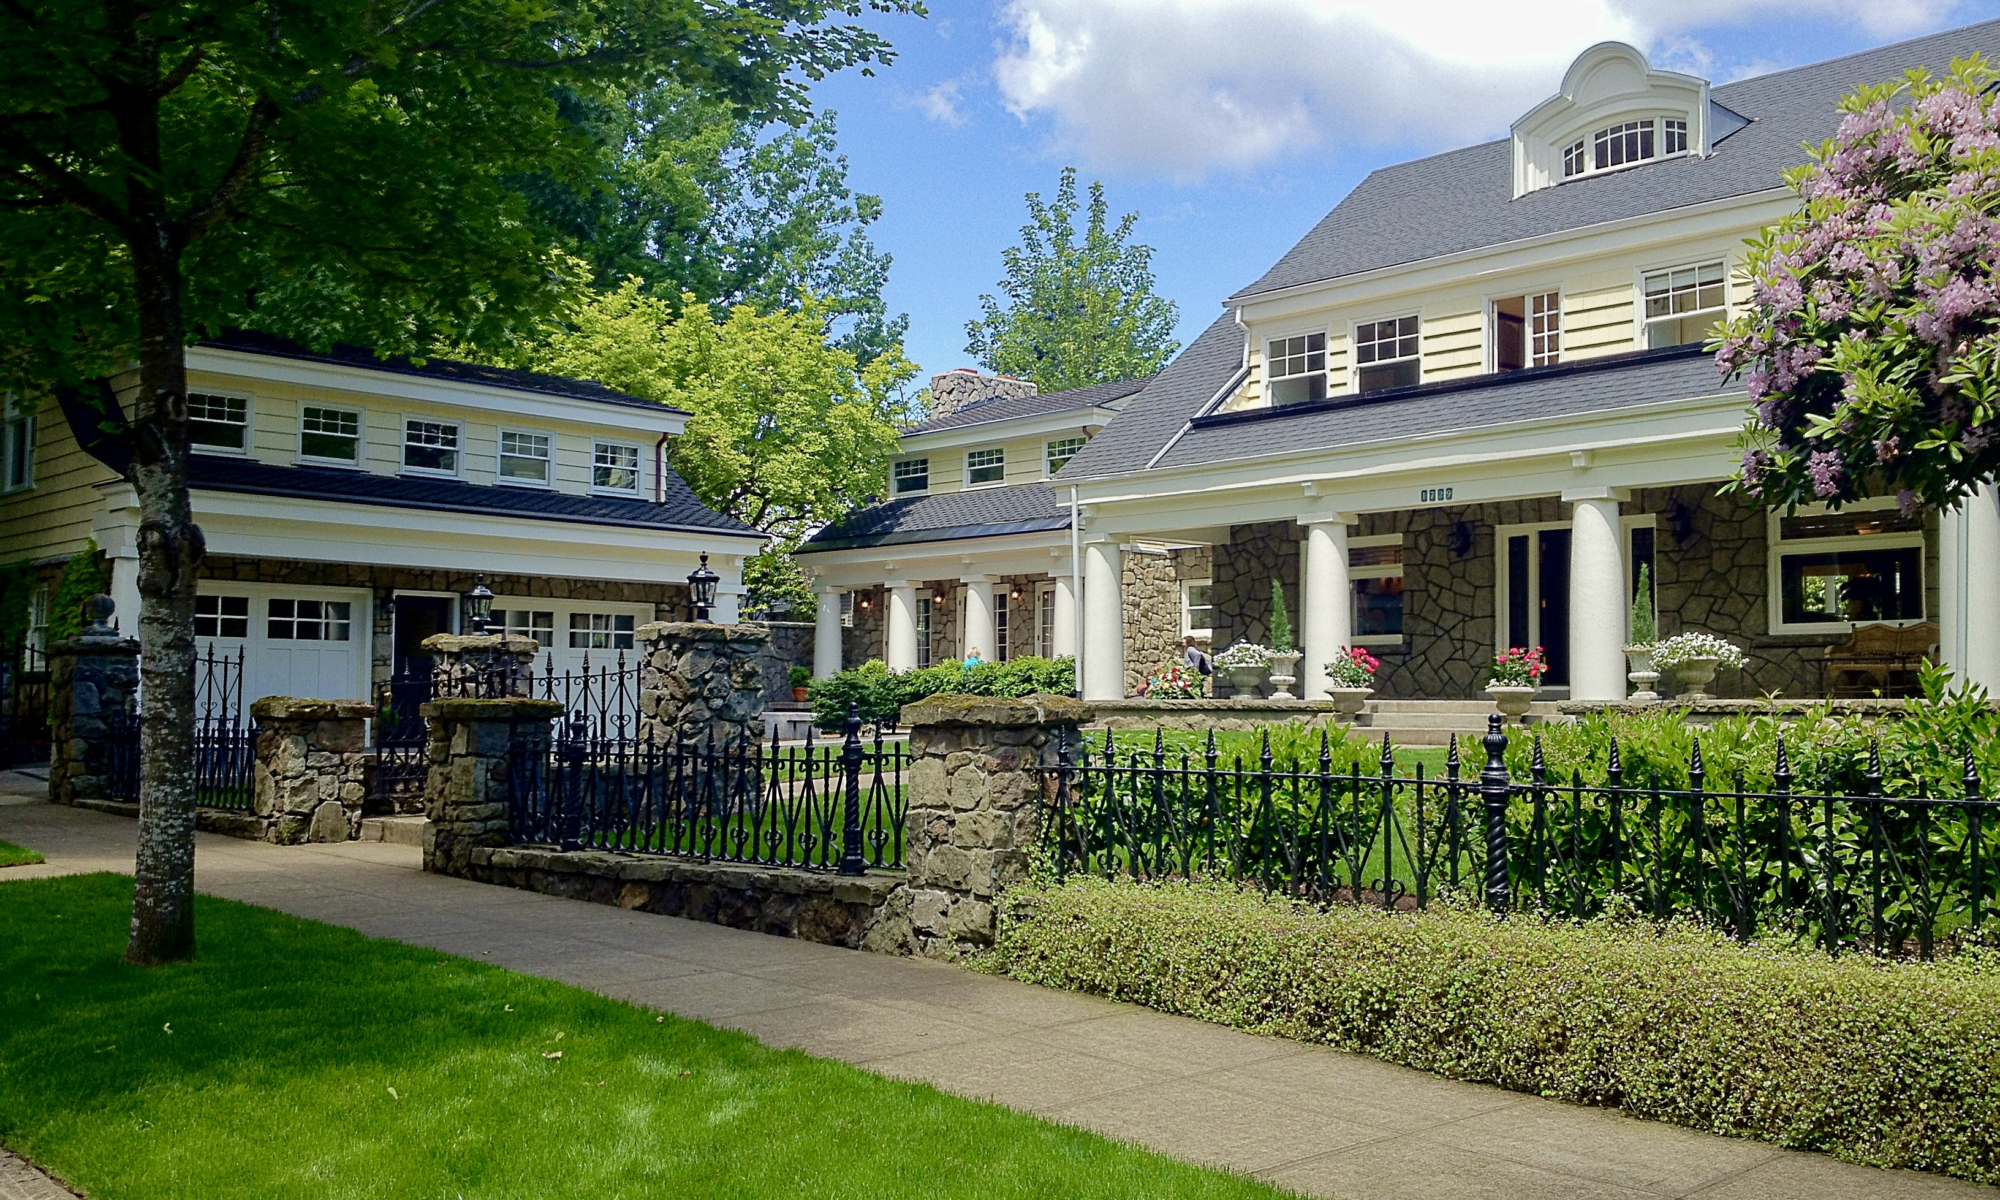 A renovated prairie style mansion, fron lawn, and cast-iron fence